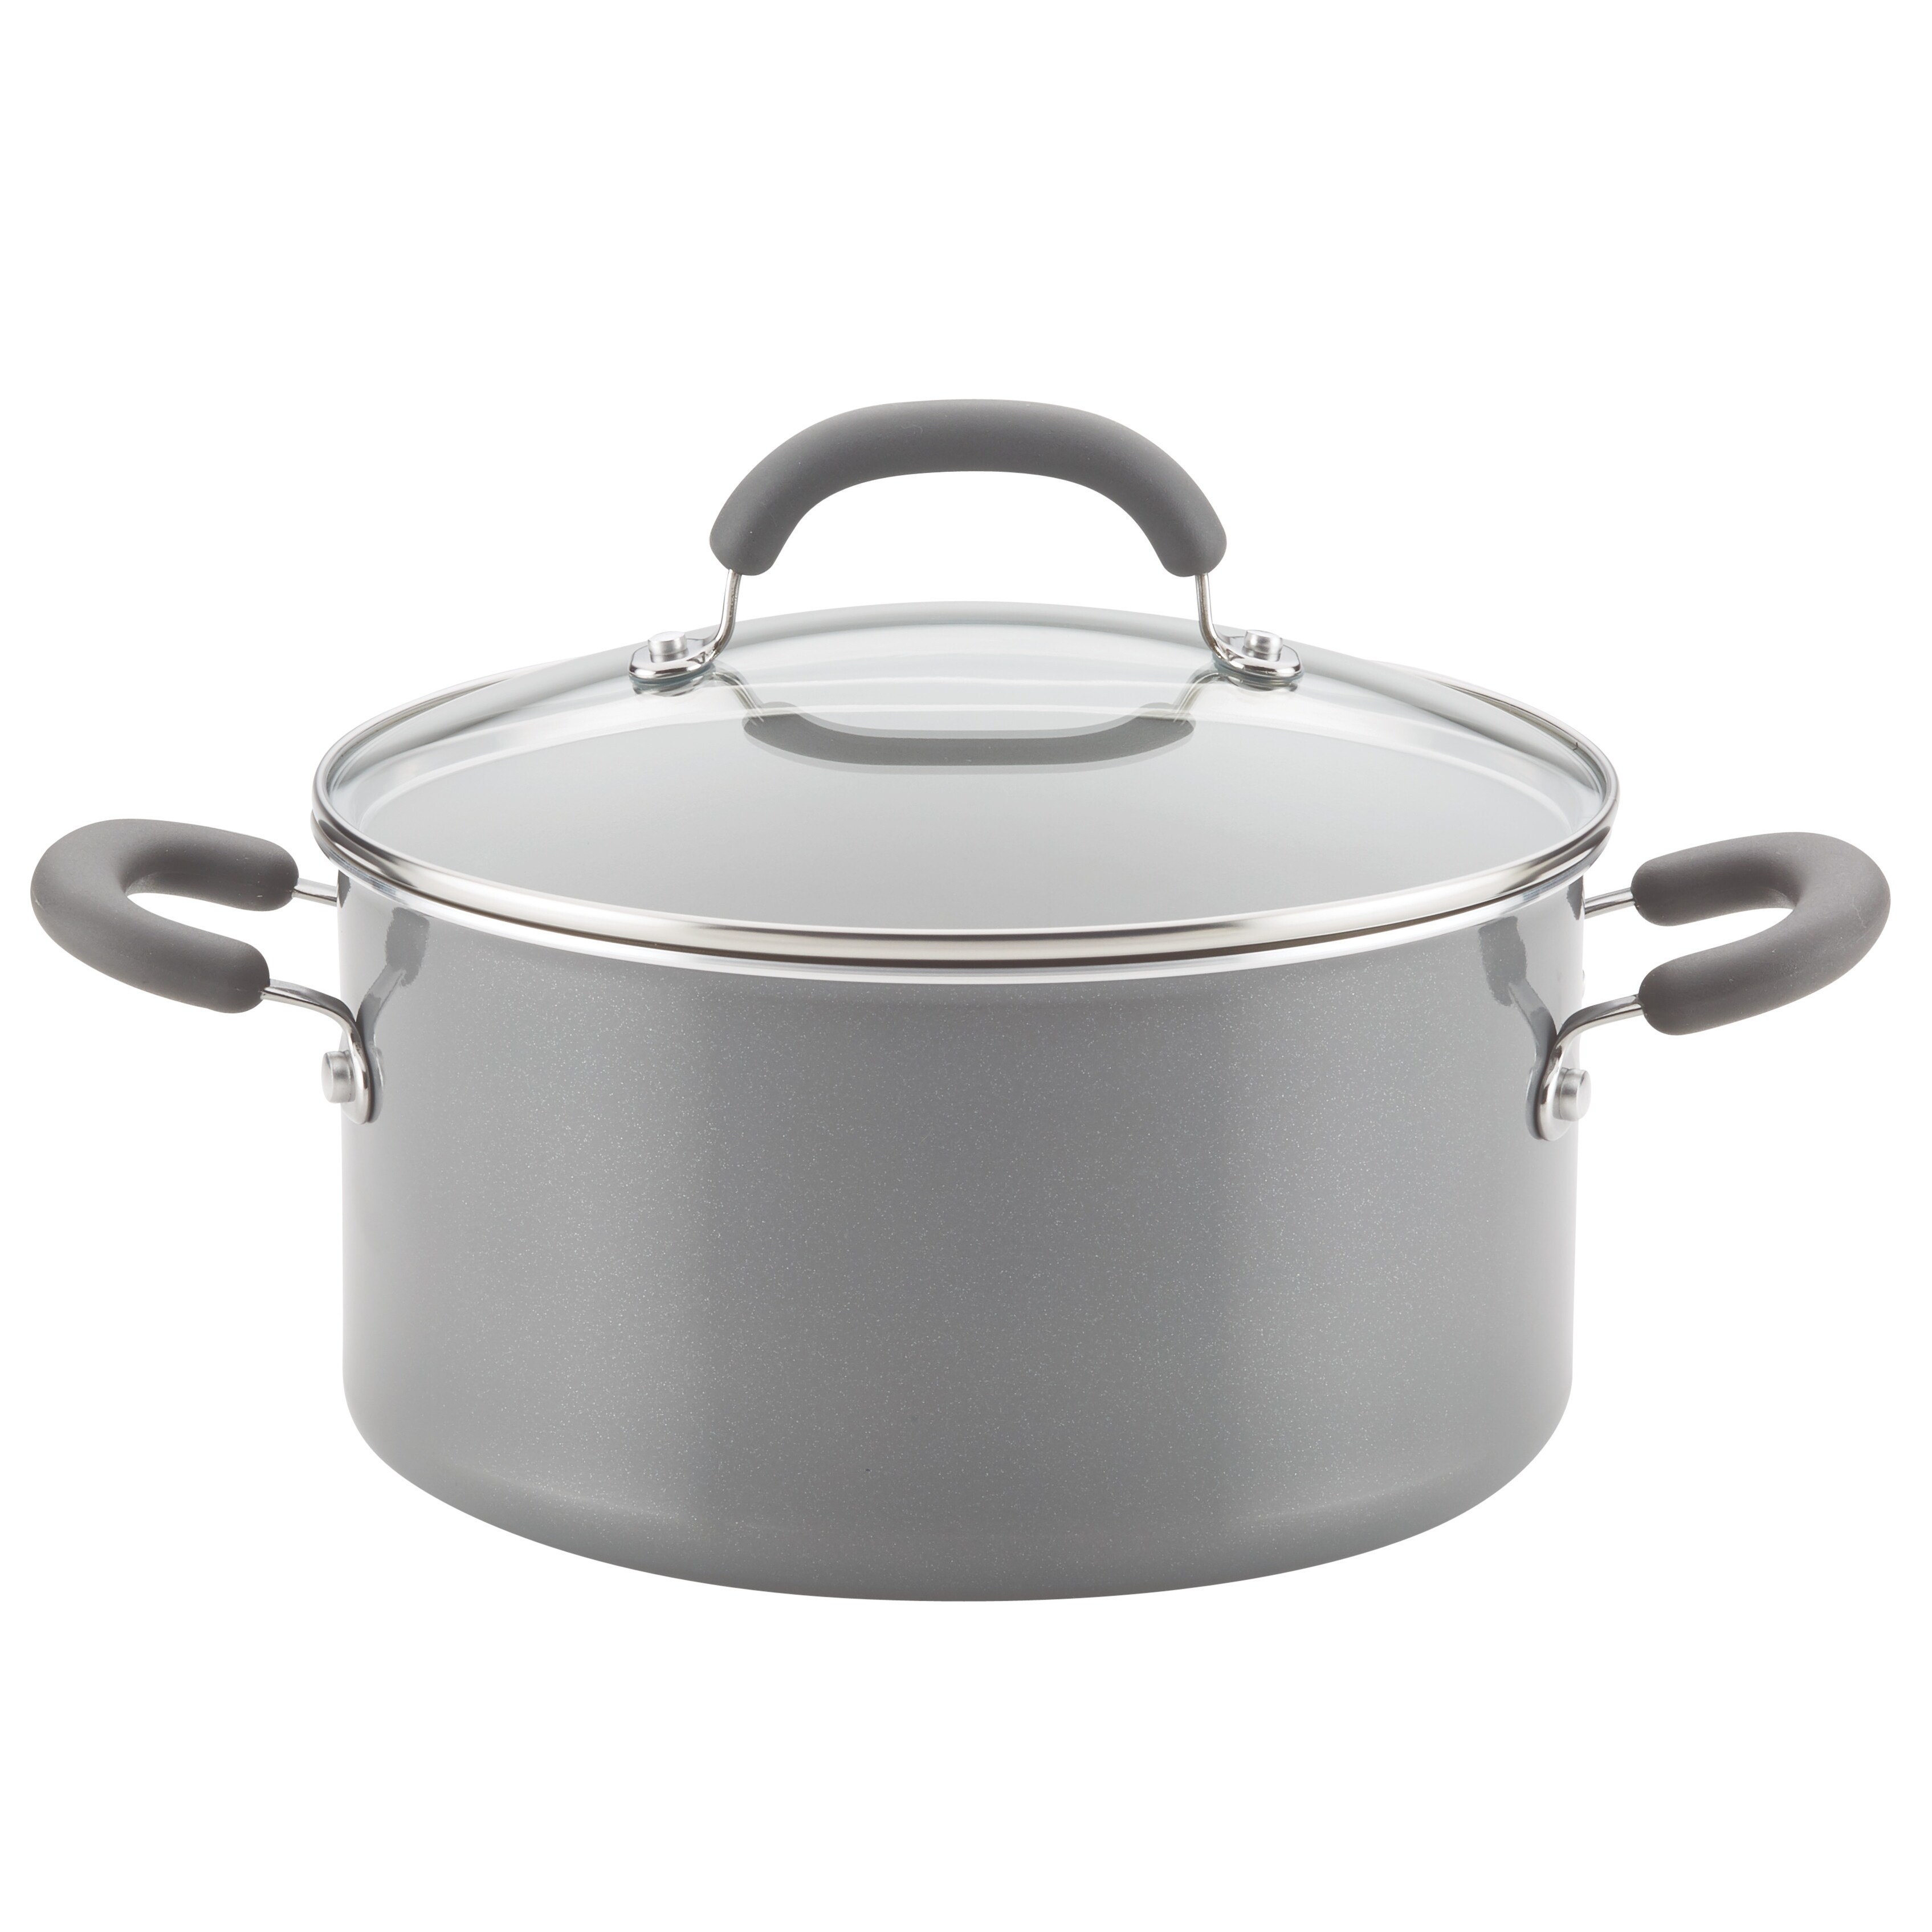 Rachael Ray Create Delicious Aluminum Nonstick Induction Stockpot, 6-Quart,  Gray Shimmer Bed Bath  Beyond 37033849